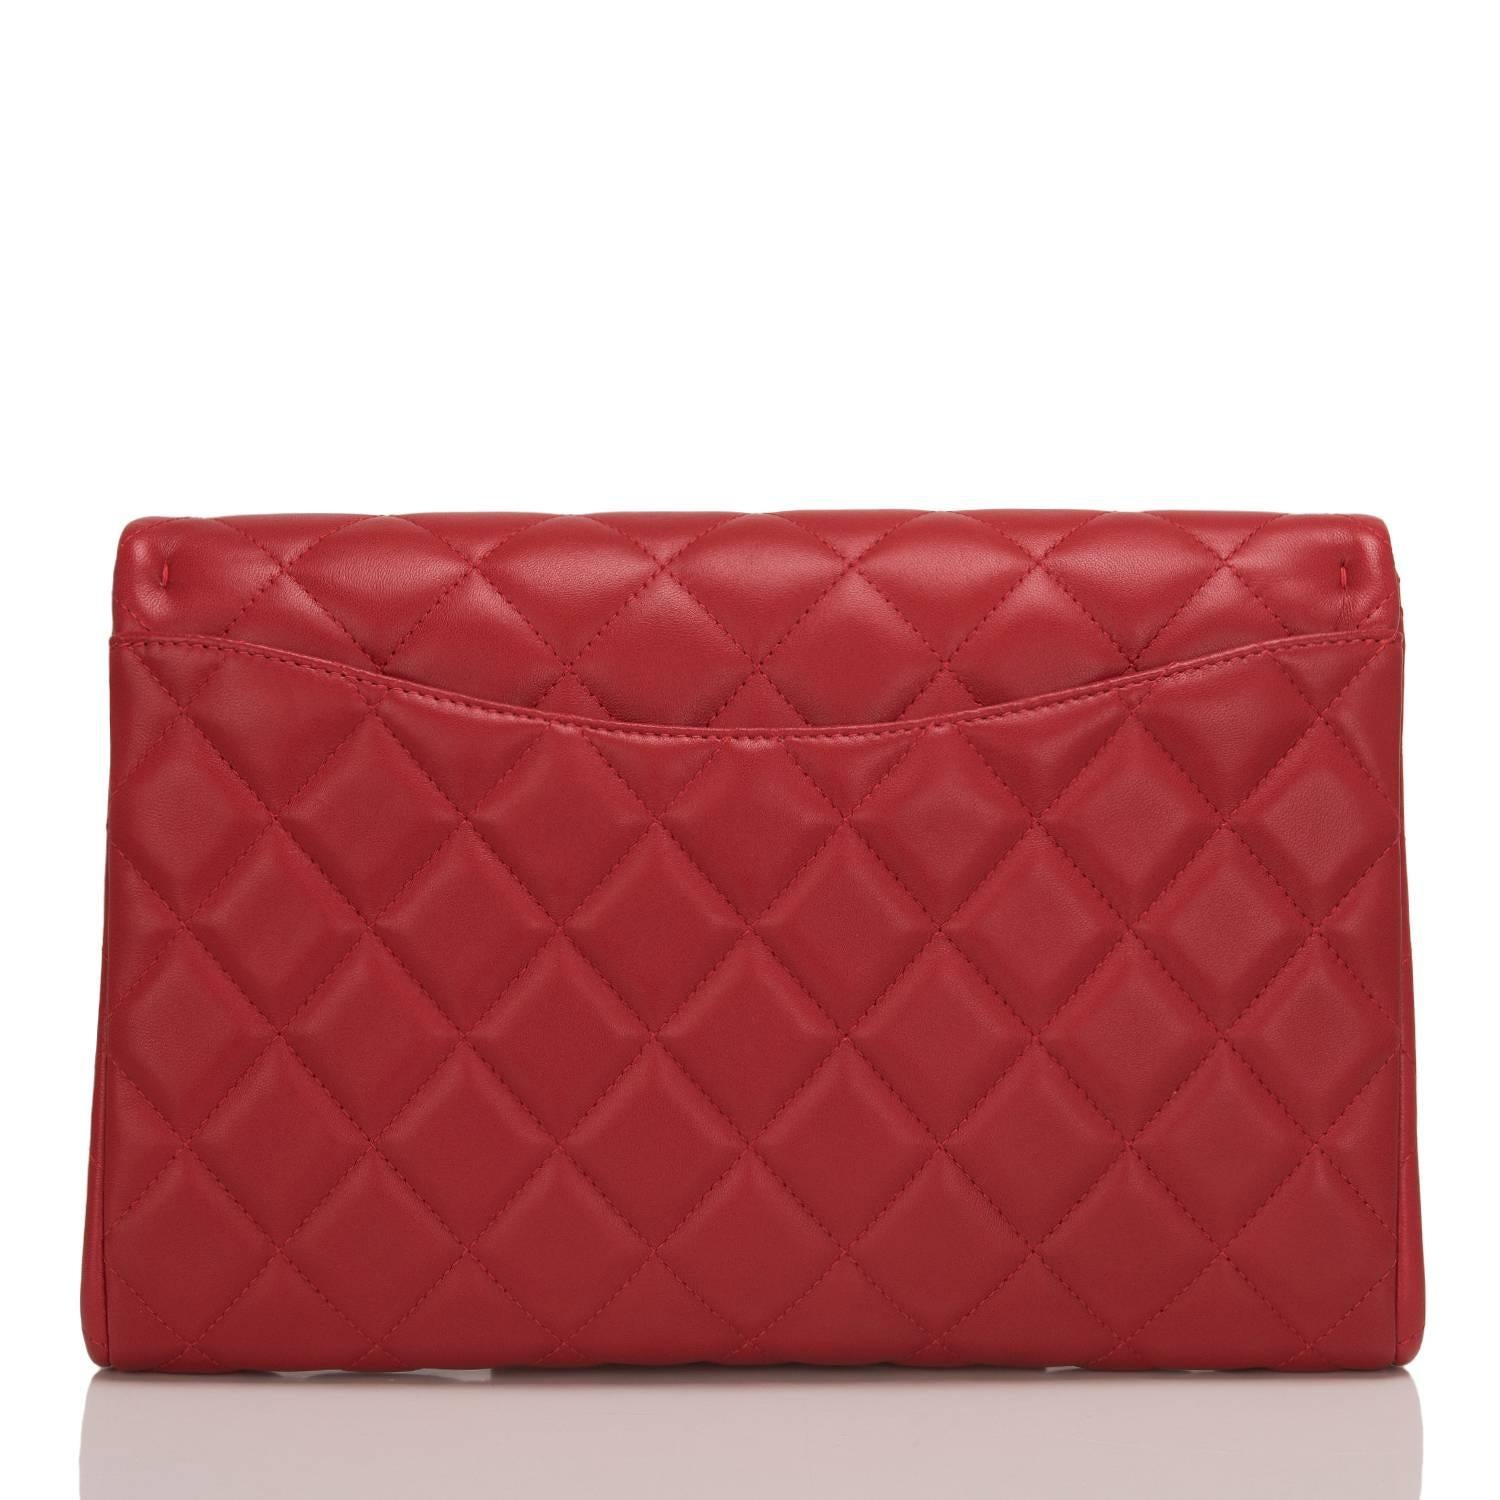 Women's Red Lambskin New Clutch With Chain